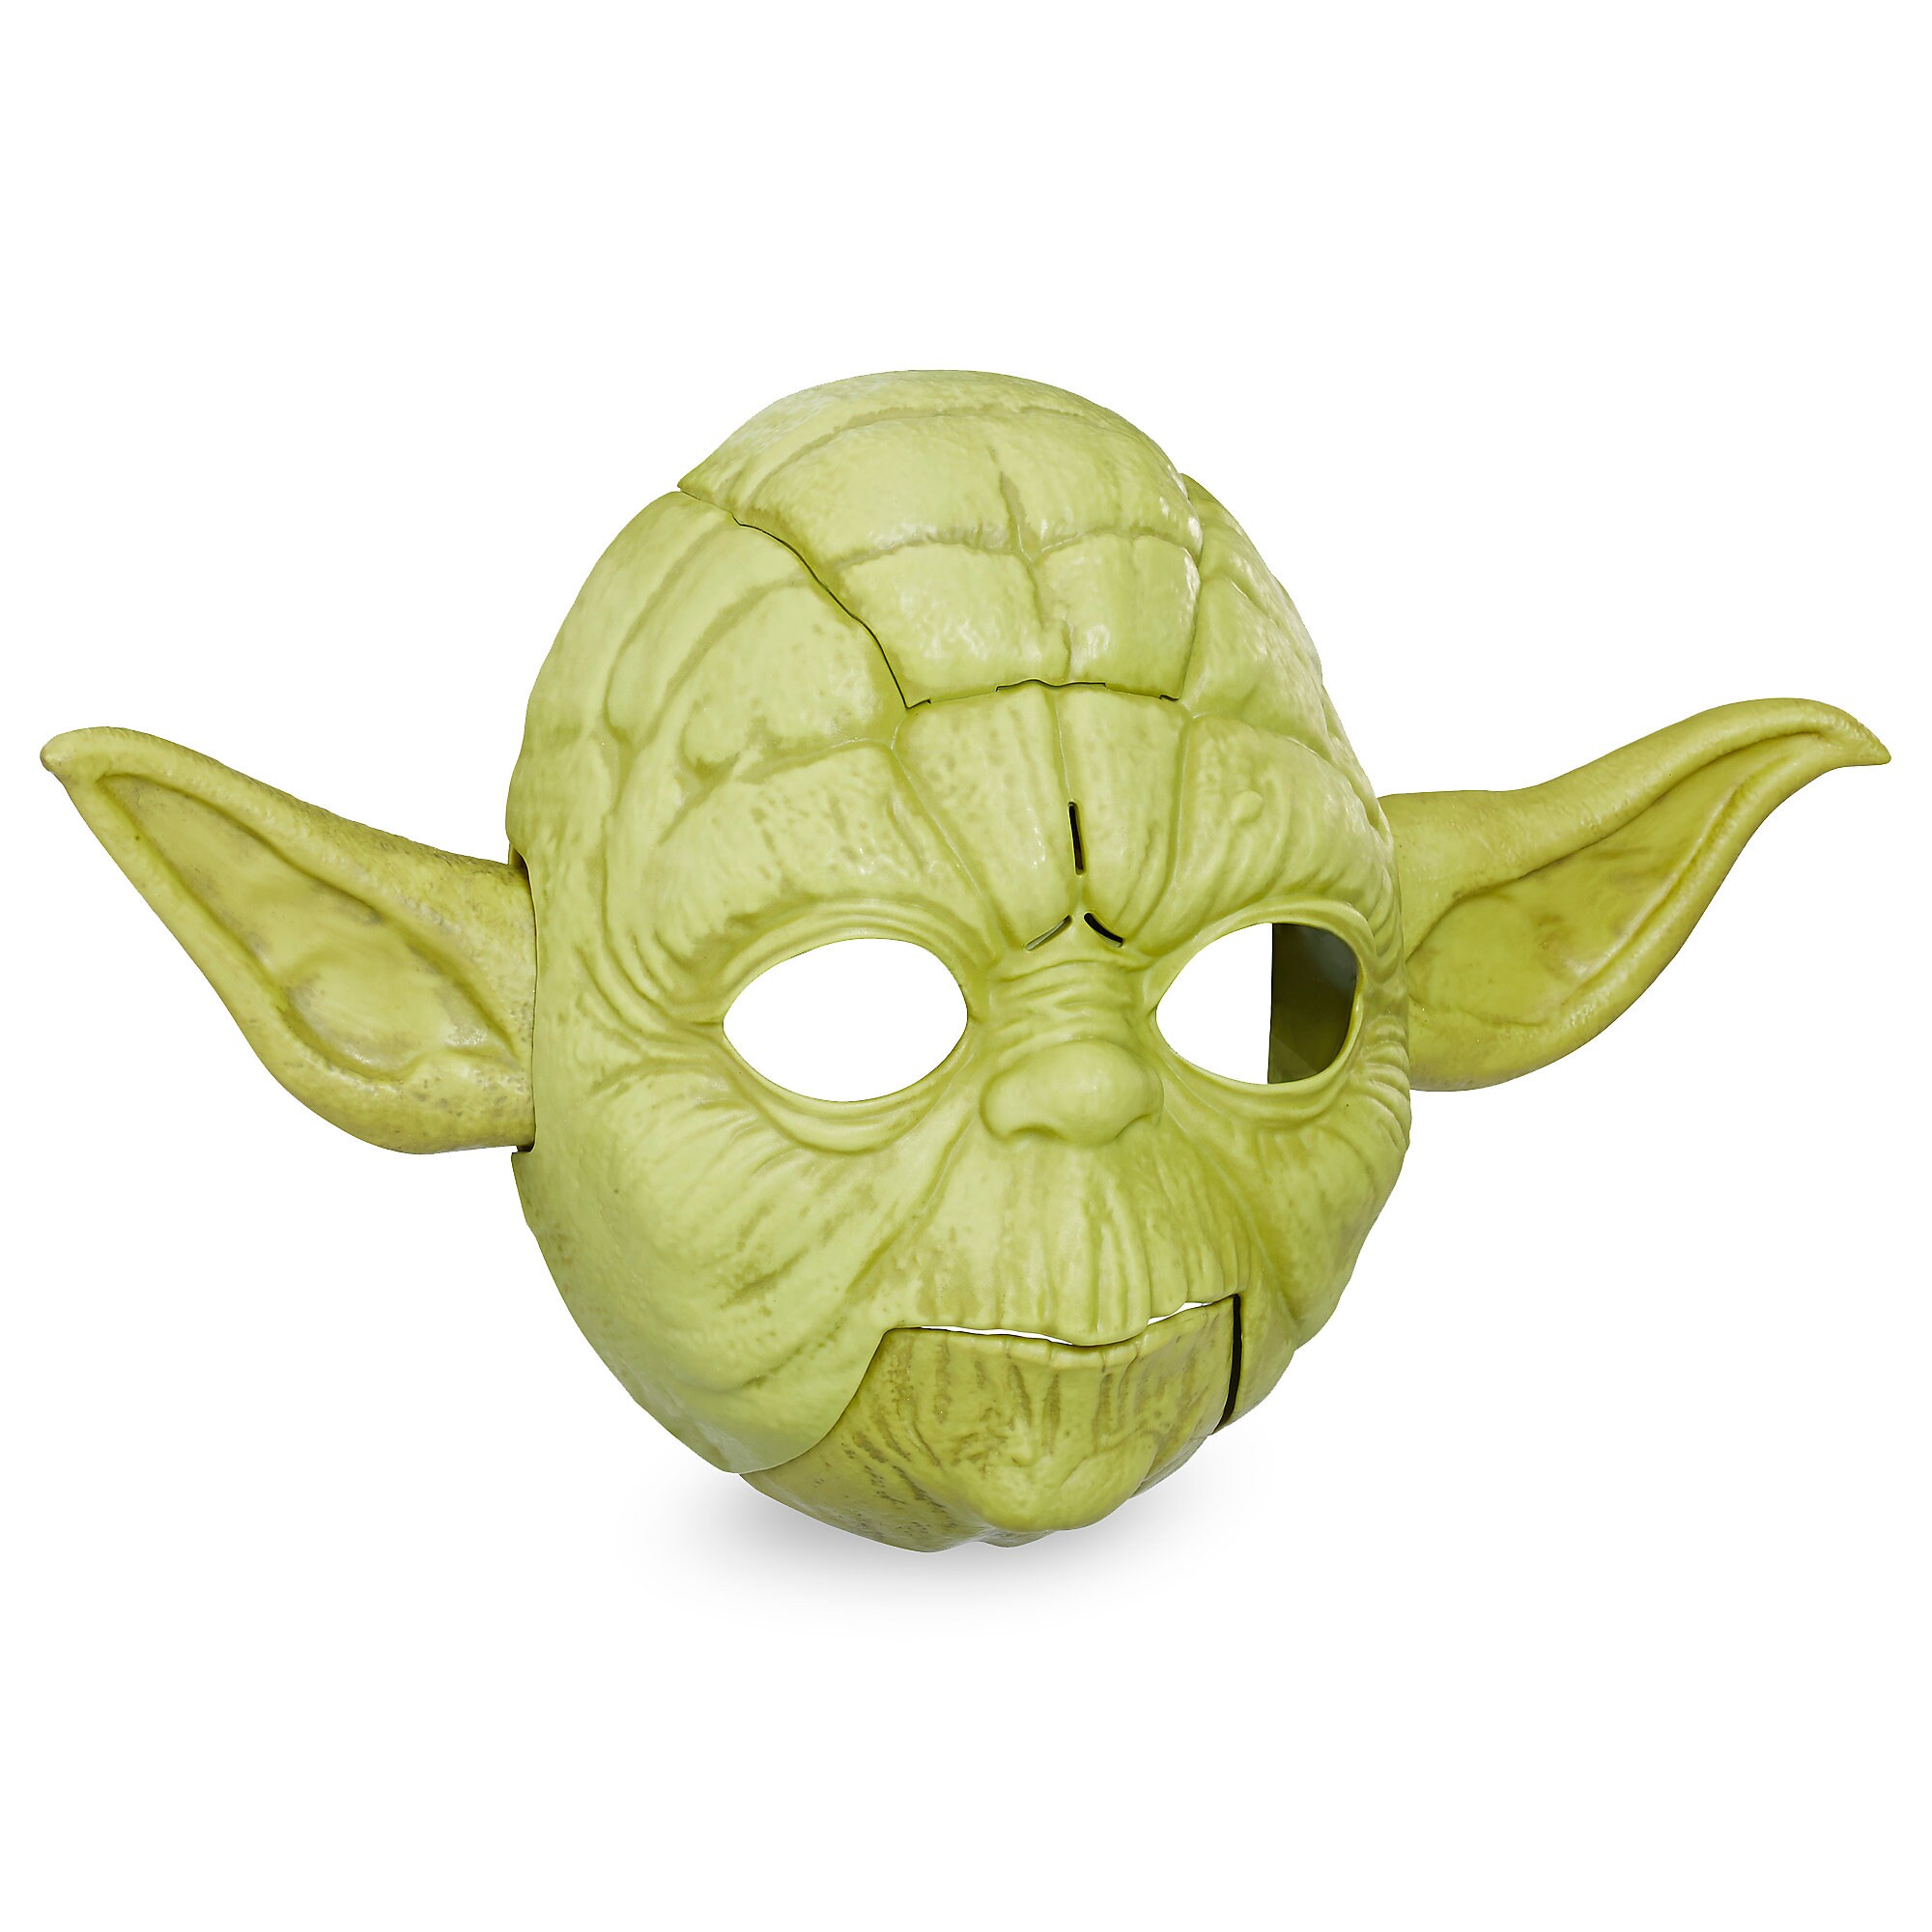 Yoda Electronic Mask for Kids by Hasbro - Star Wars